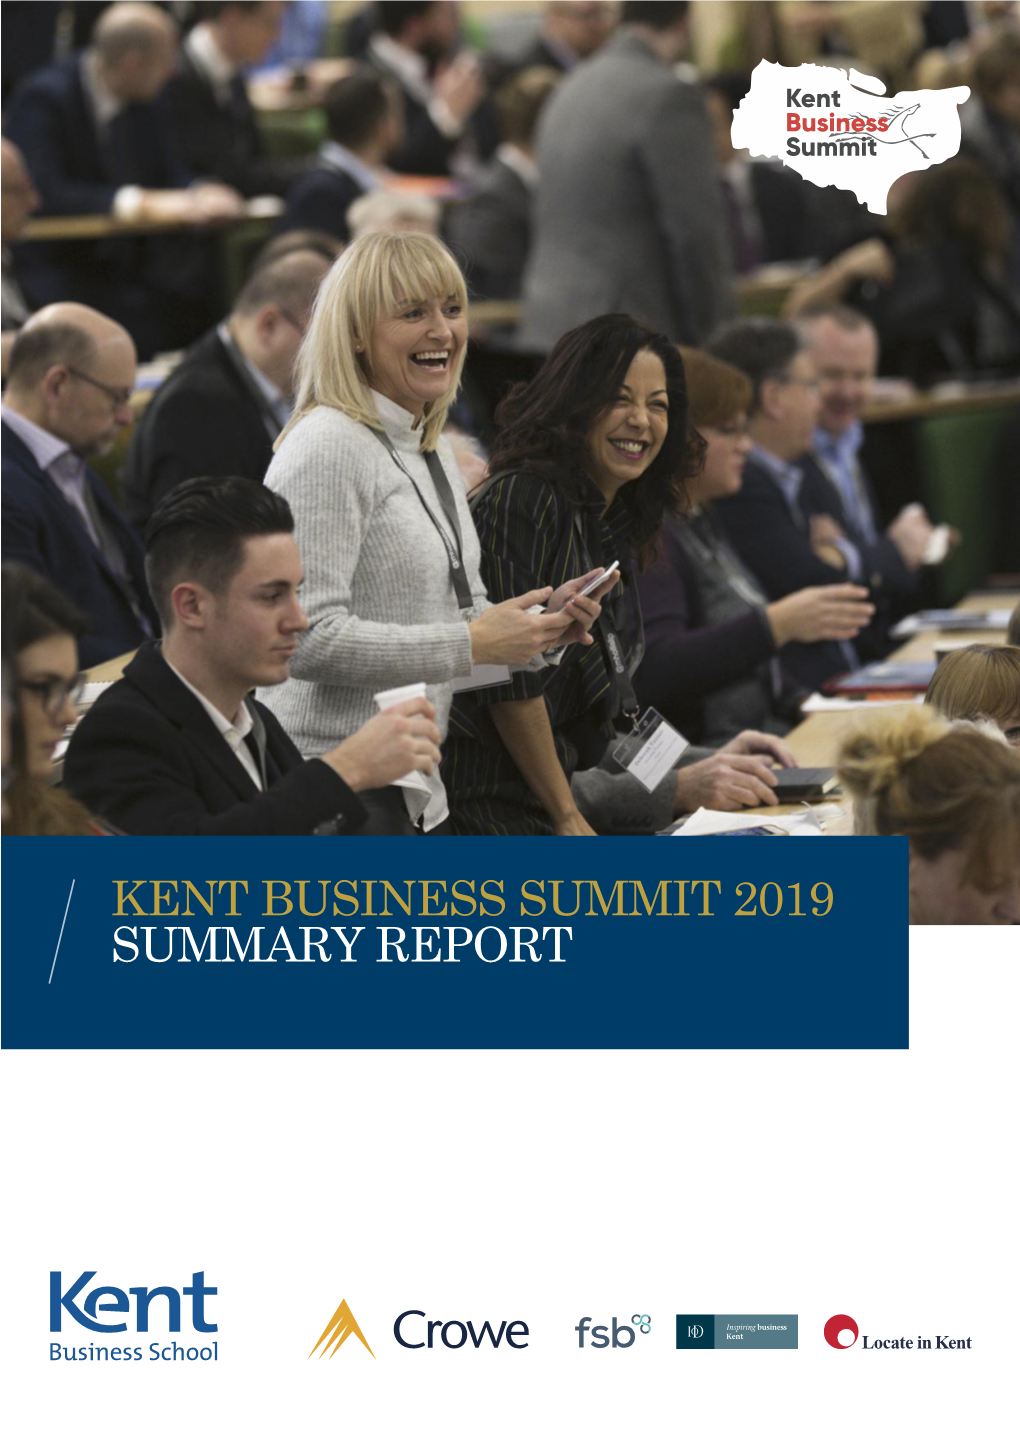 Kent Business Summit 2019 Summary Report Contents